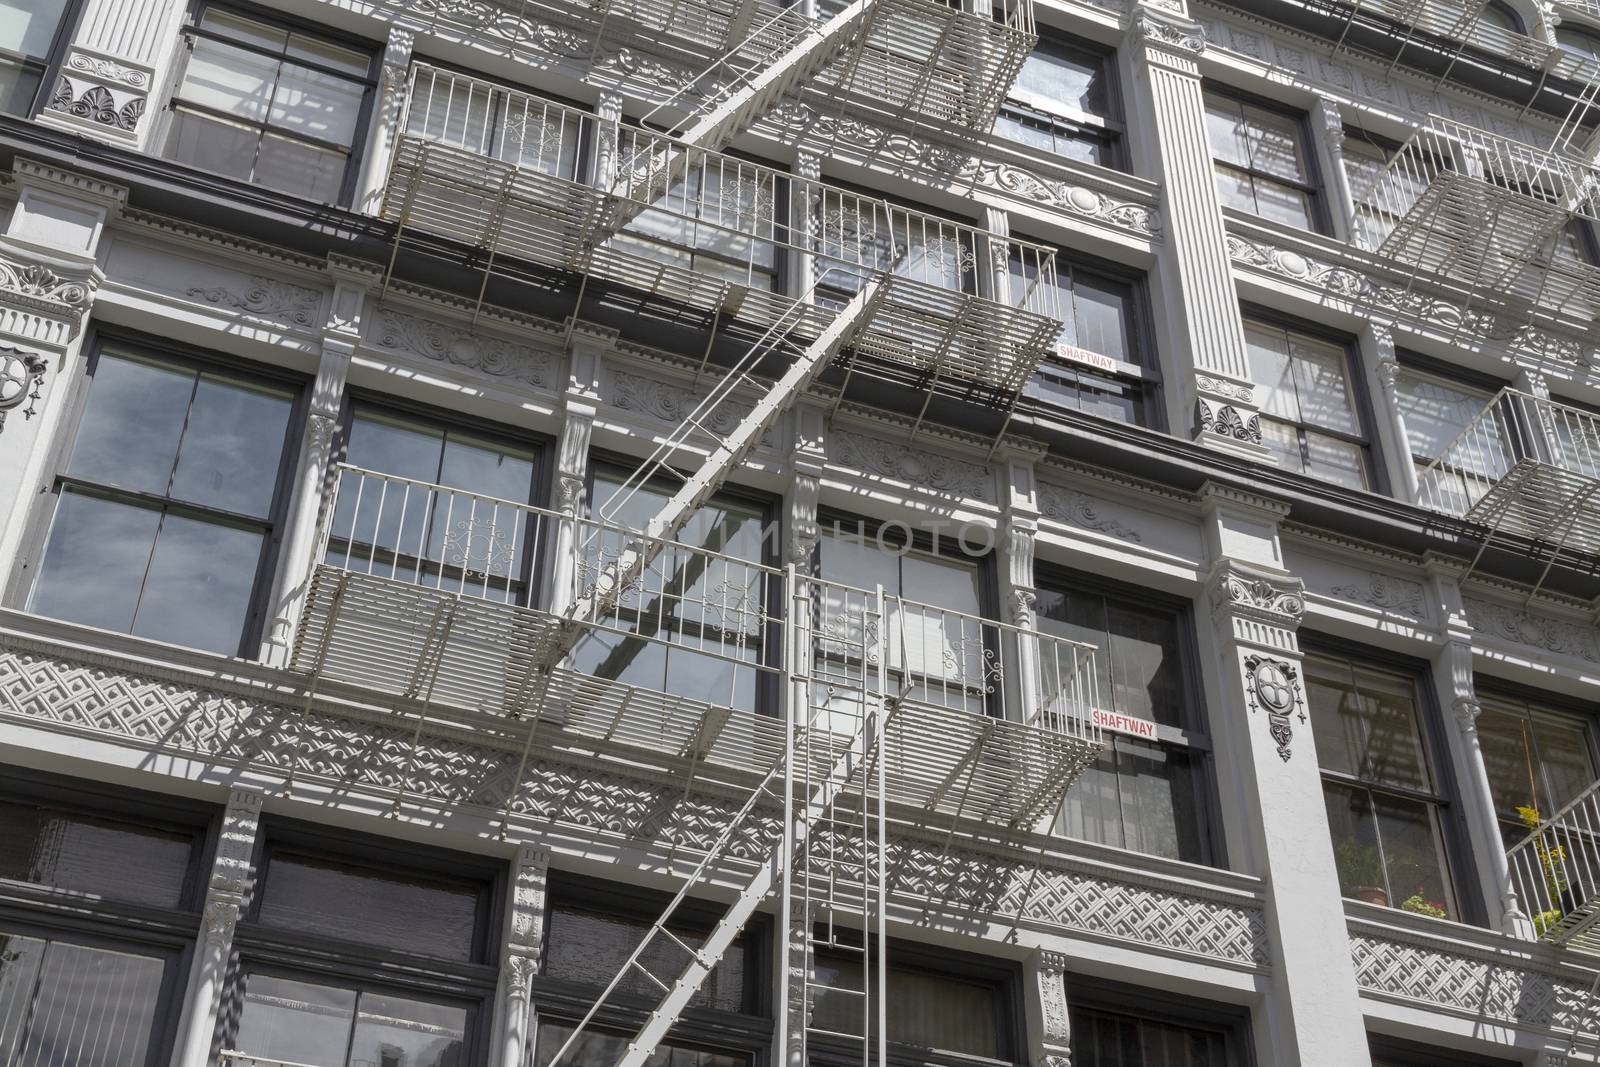 Exterior fire escape stairs on the outside of an old brick building. New York